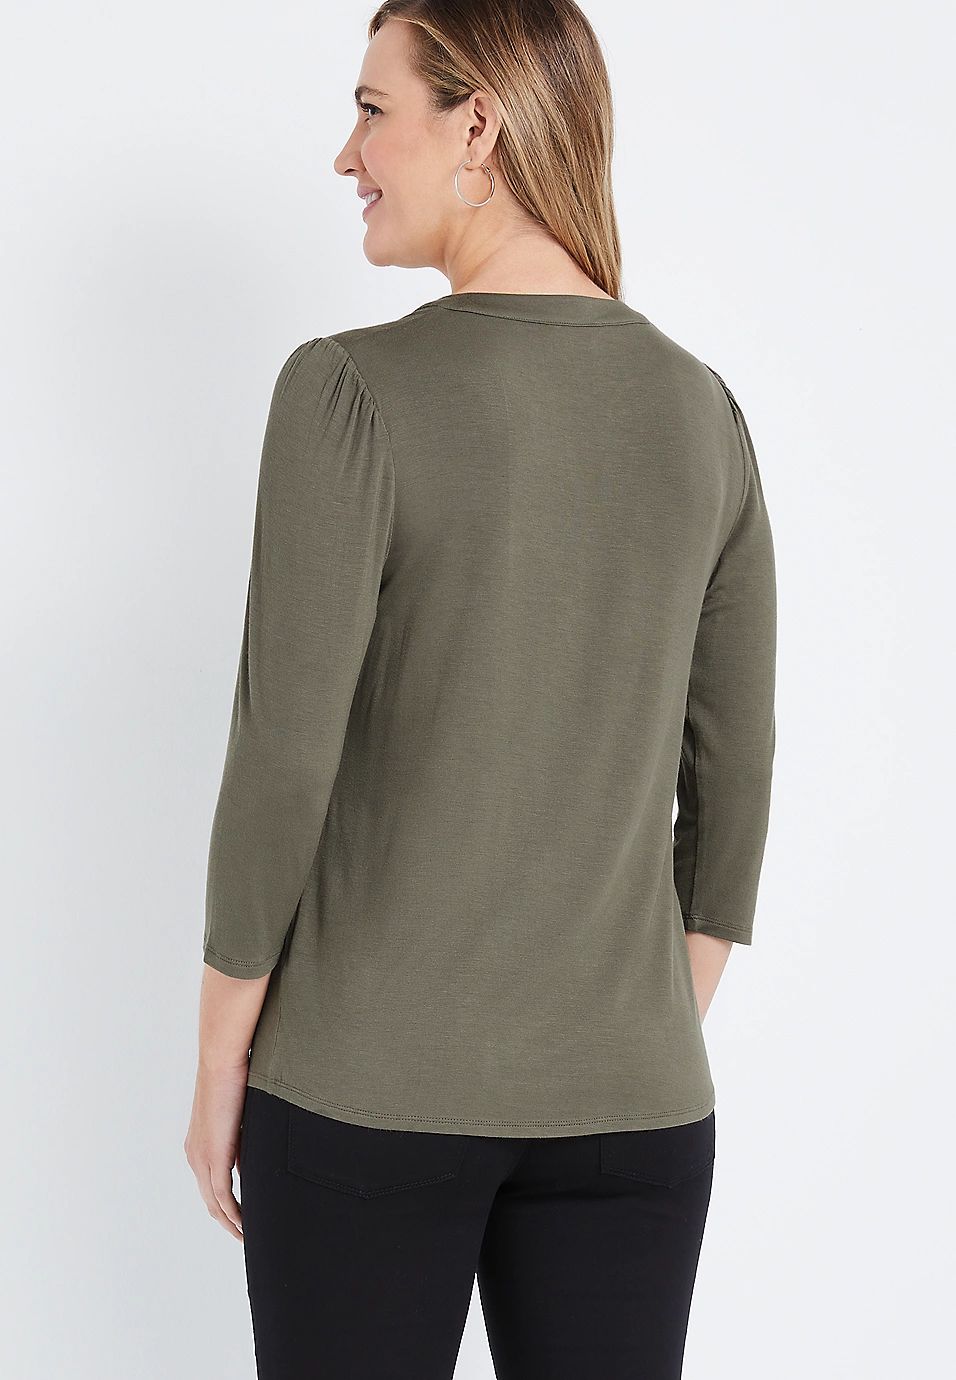 24/7 Green Button Front Tee | Maurices